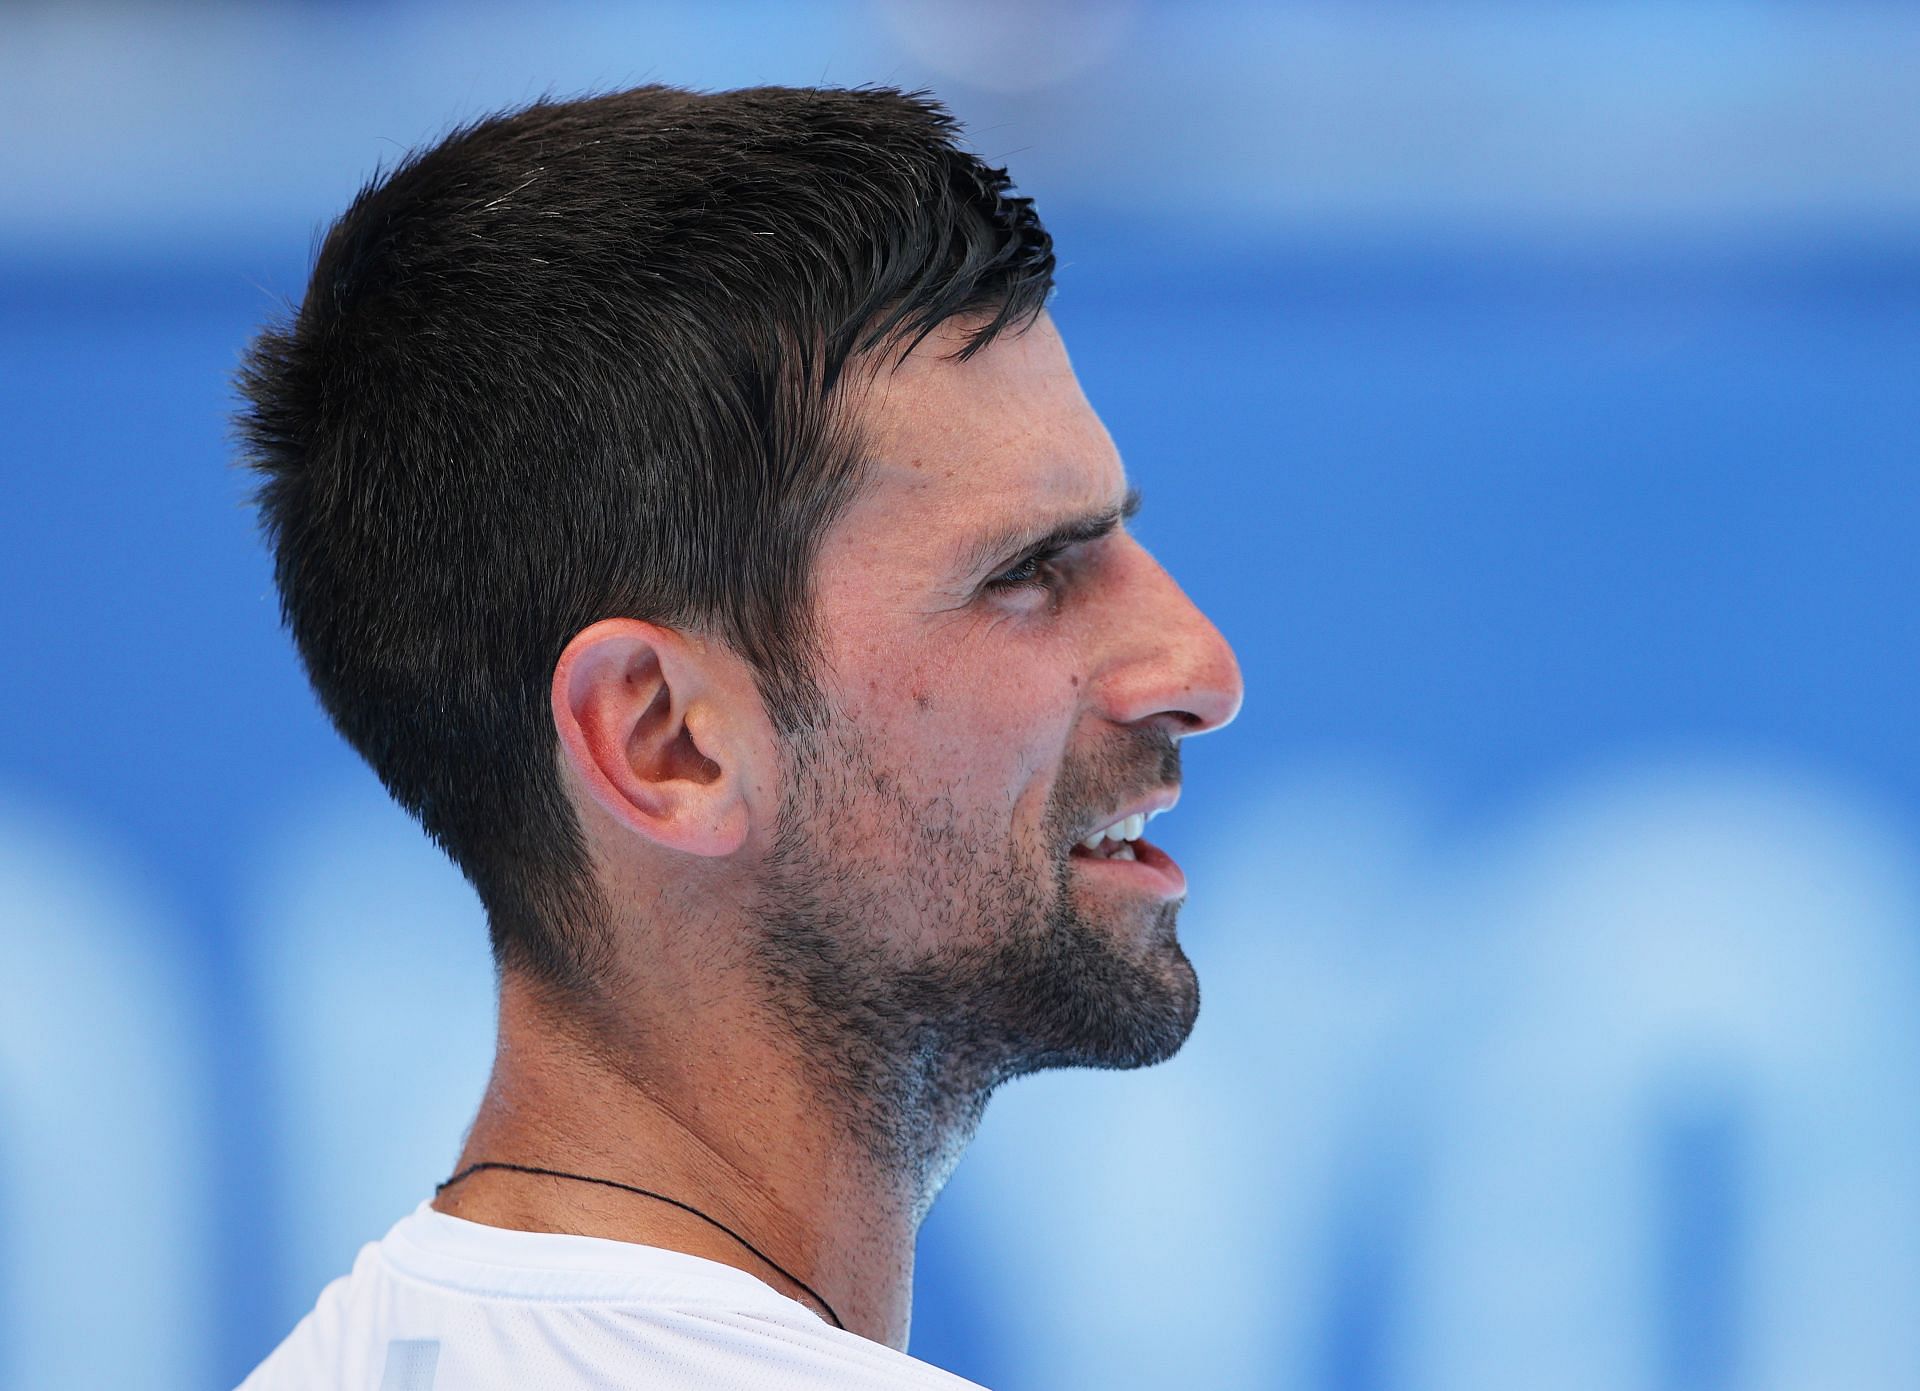 Djokovic was escorted by the police amid violence from protesters in Melbourne